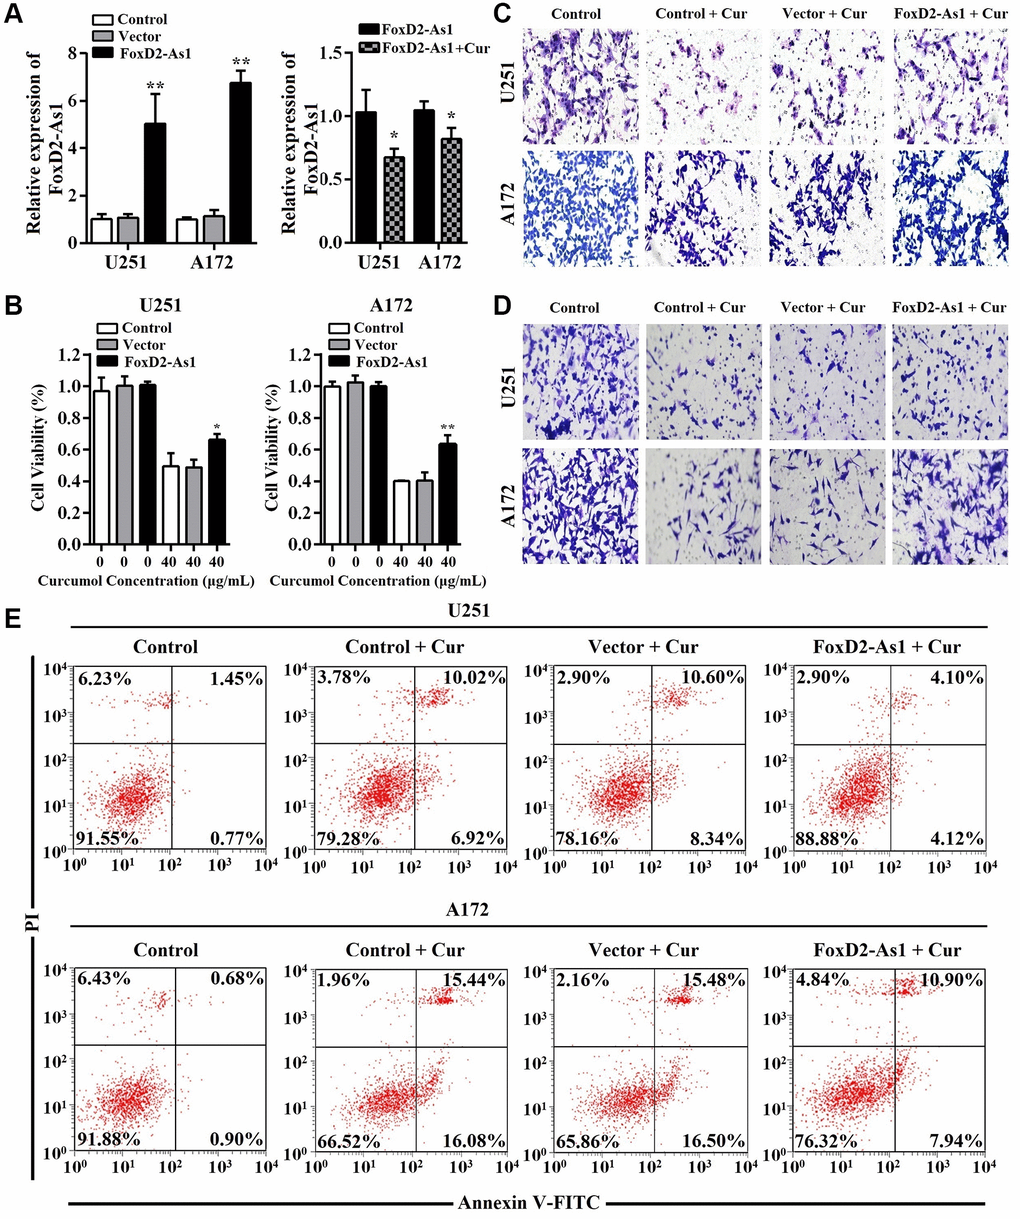 Over-expression of FoxD2-As1 reduced the anti-proliferation, anti-metastasis, and pro-apoptosis effects of curcumol in glioma cells. (A) qRT-PCR was performed to determine FOXD2-As1 expression in glioma cells of each group. pcDNA3.1-FOXD2-As1 transfection markedly increased the expression of FOXD2-As1 in glioma cells while the upregulated FOXD2-As1 expression was inhibited by curcumol treatment. (B) MTT assay was performed to determine the viability of each group cells after treated with curcumol for 48 h. (C) Transwell migration and (D) invasion assays were performed to examine the metastasis of each group cells after treated with curcumol for 48 h. (E) Annexin V-FITC/PI apoptosis assay was performed to examine the apoptotic rate of each group cells after treated with curcumol for 48 h. Data were represented as means ± SD from at least of three independent experiments. *p **p 